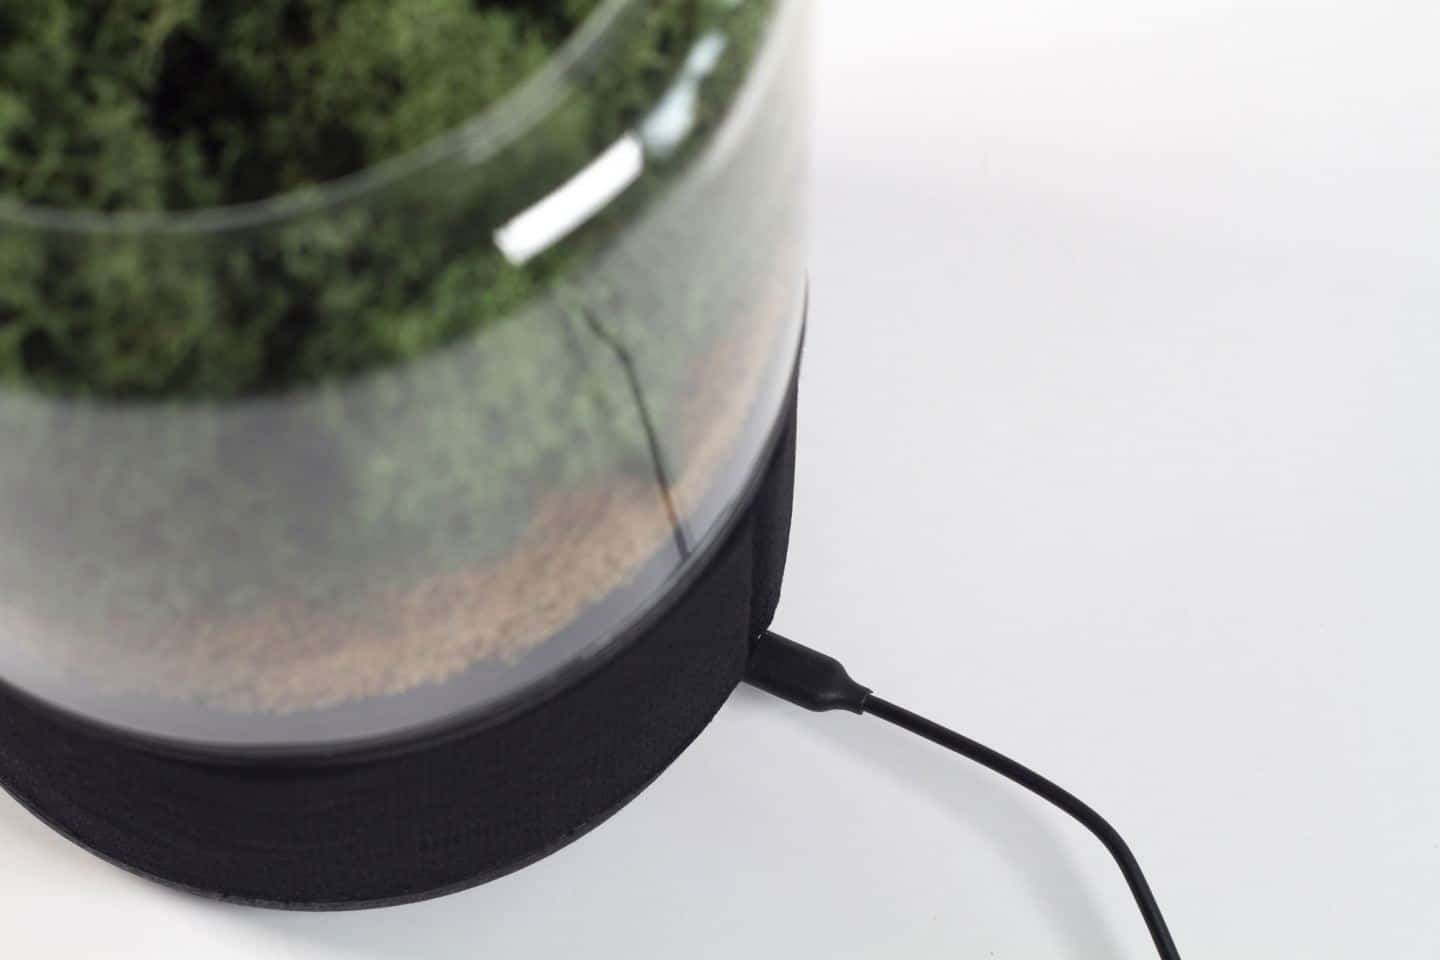 Briiv air purifier plugged in with a usb cord